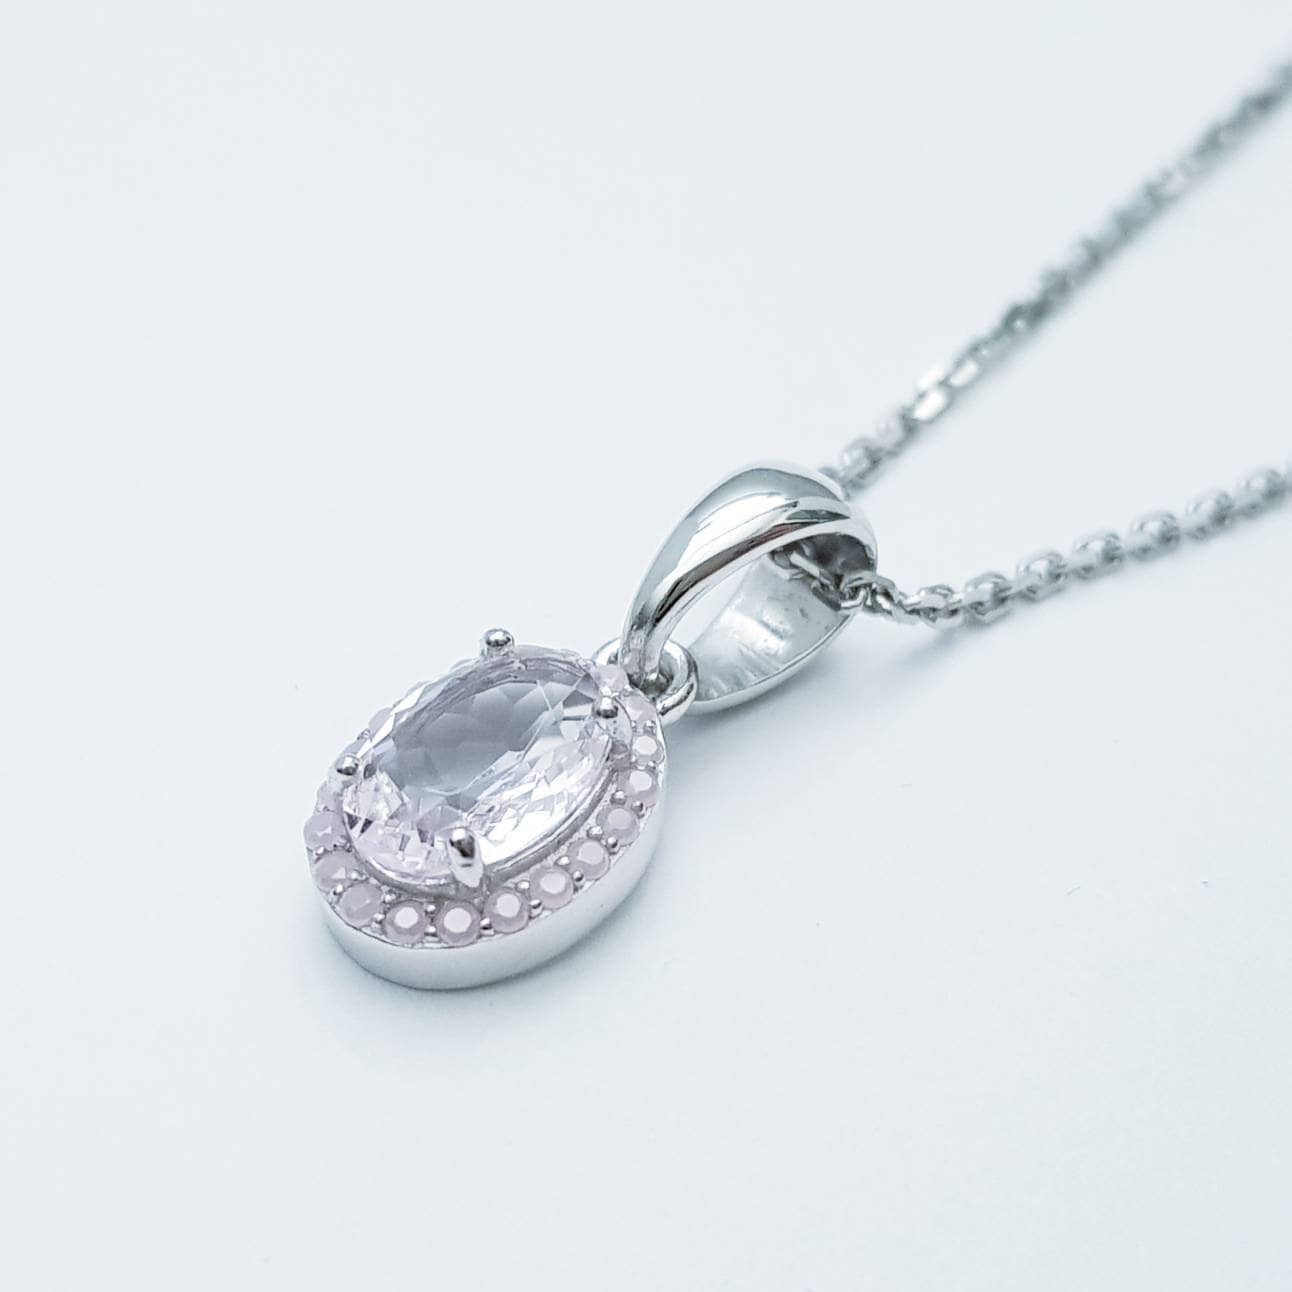 Dainty small pink halo necklace, cute pink pendant